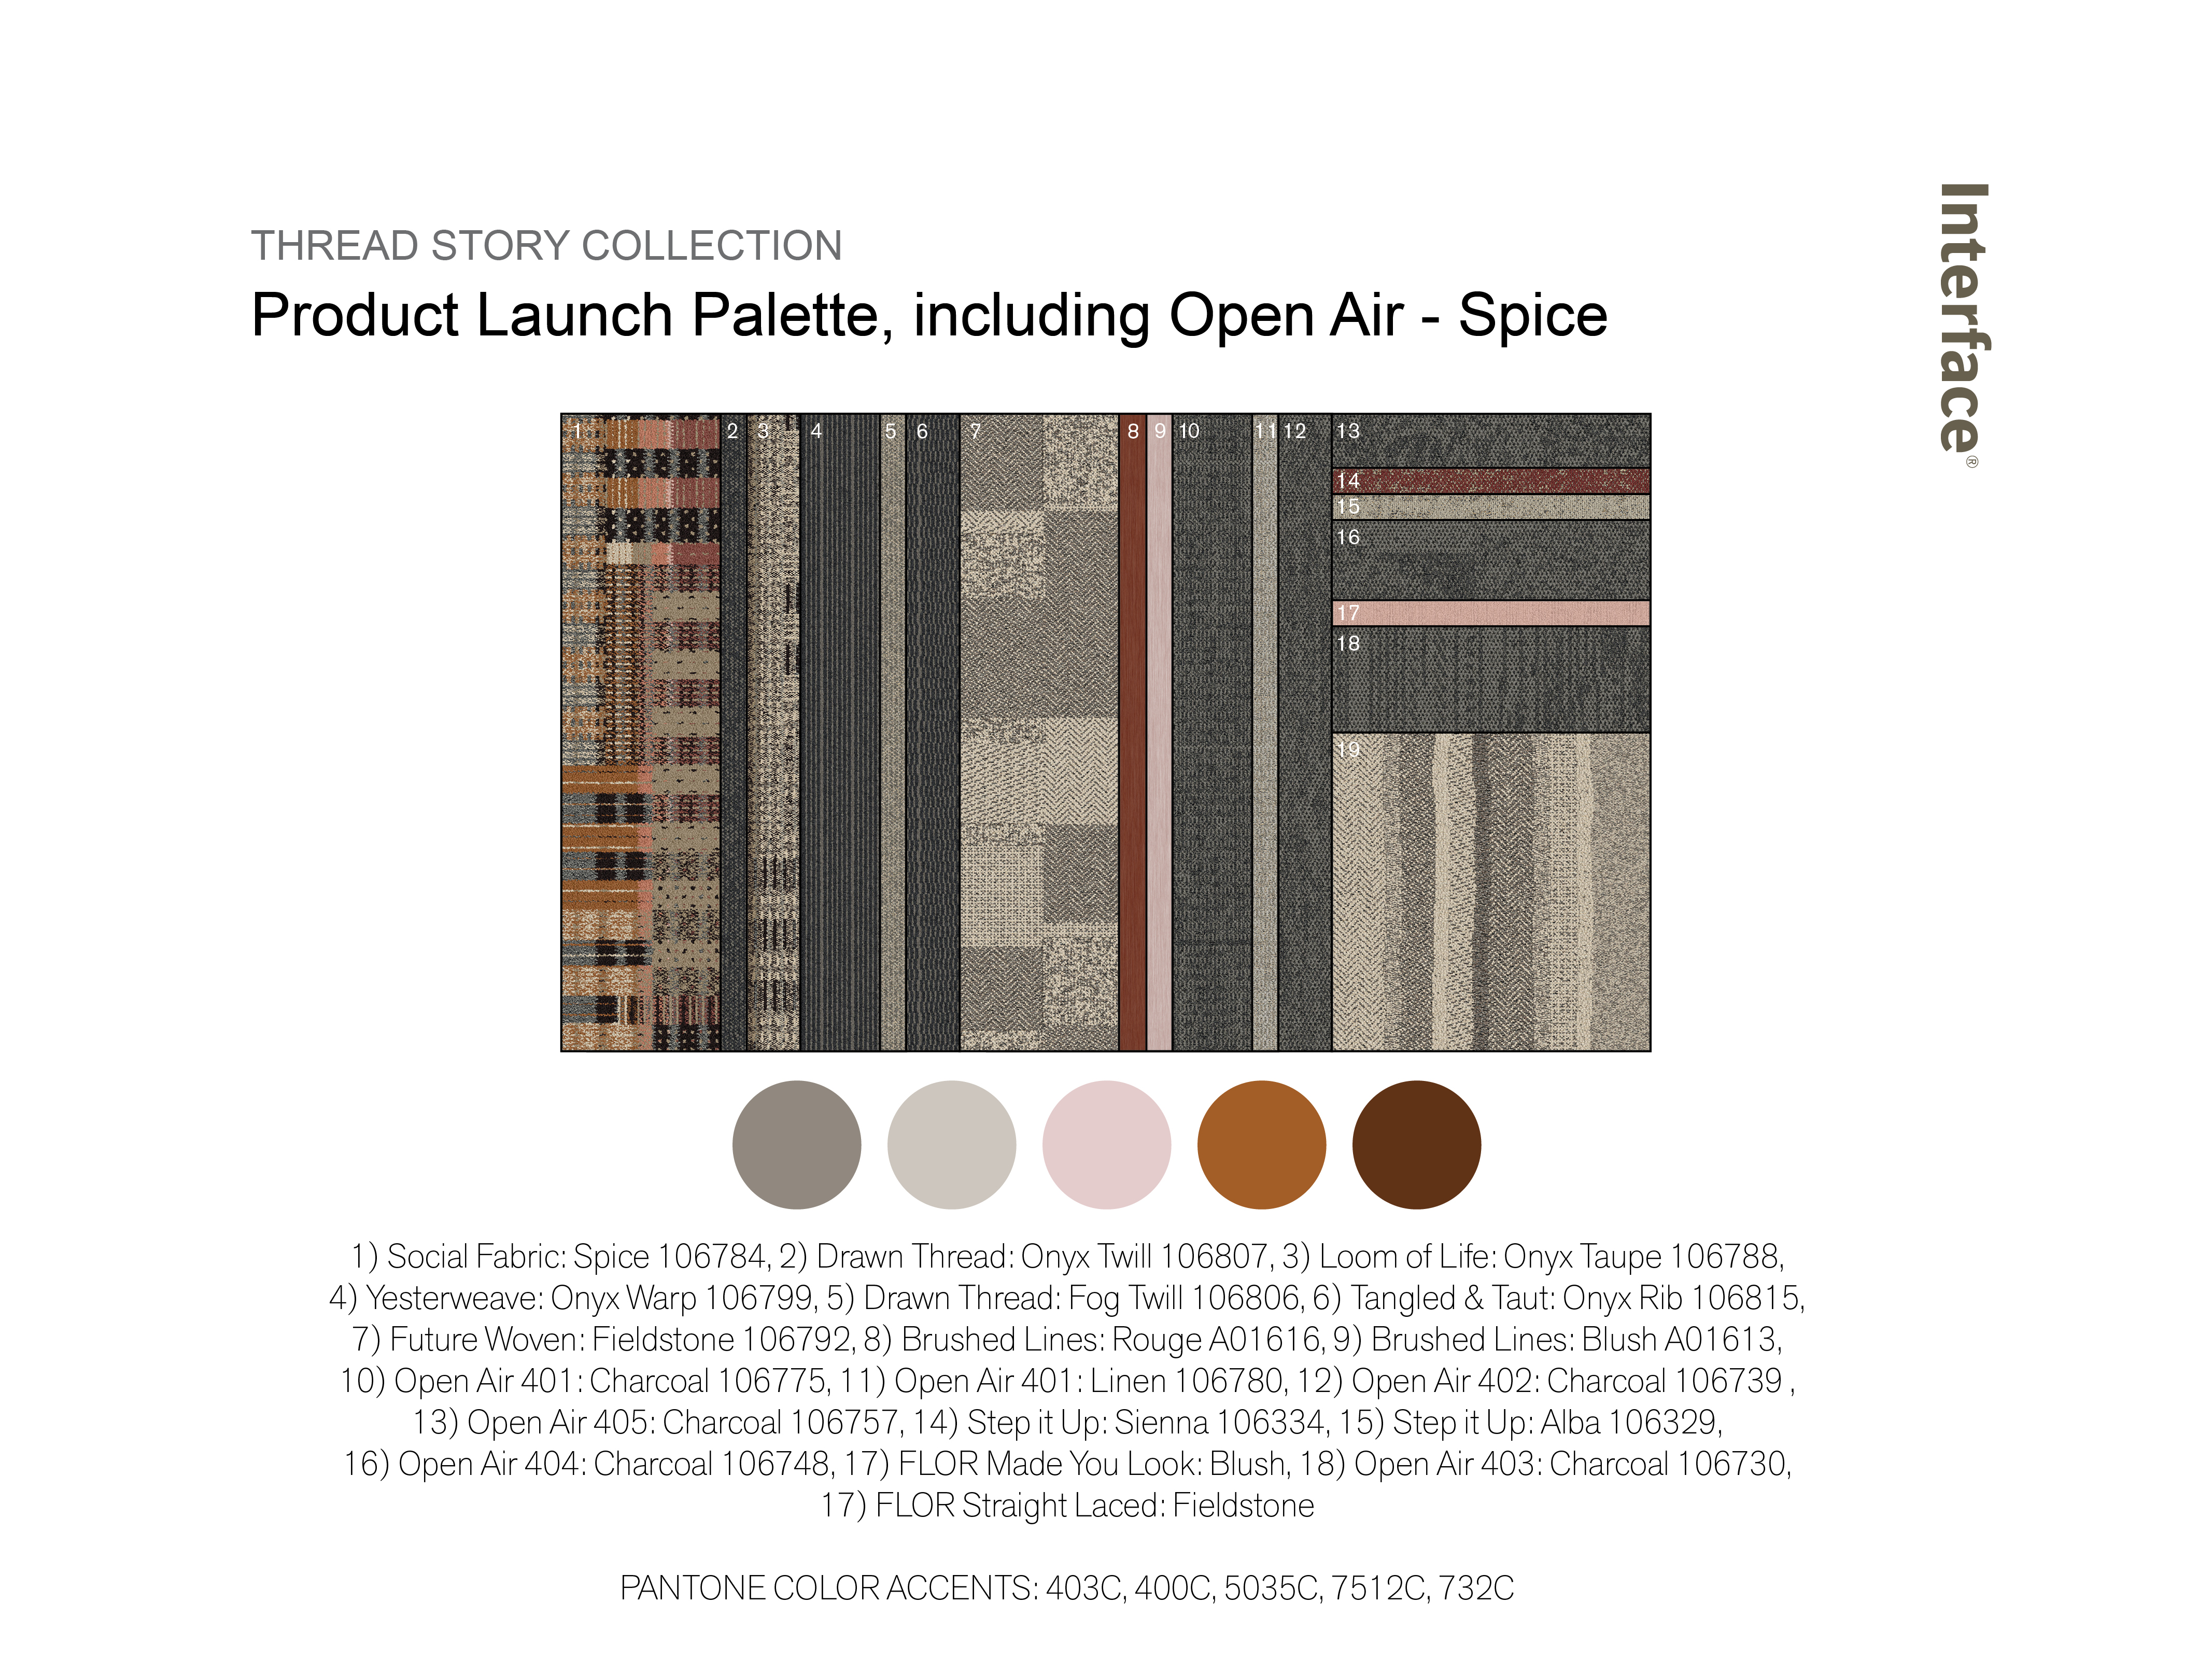 Thread Story with Open Air - Spice Palette